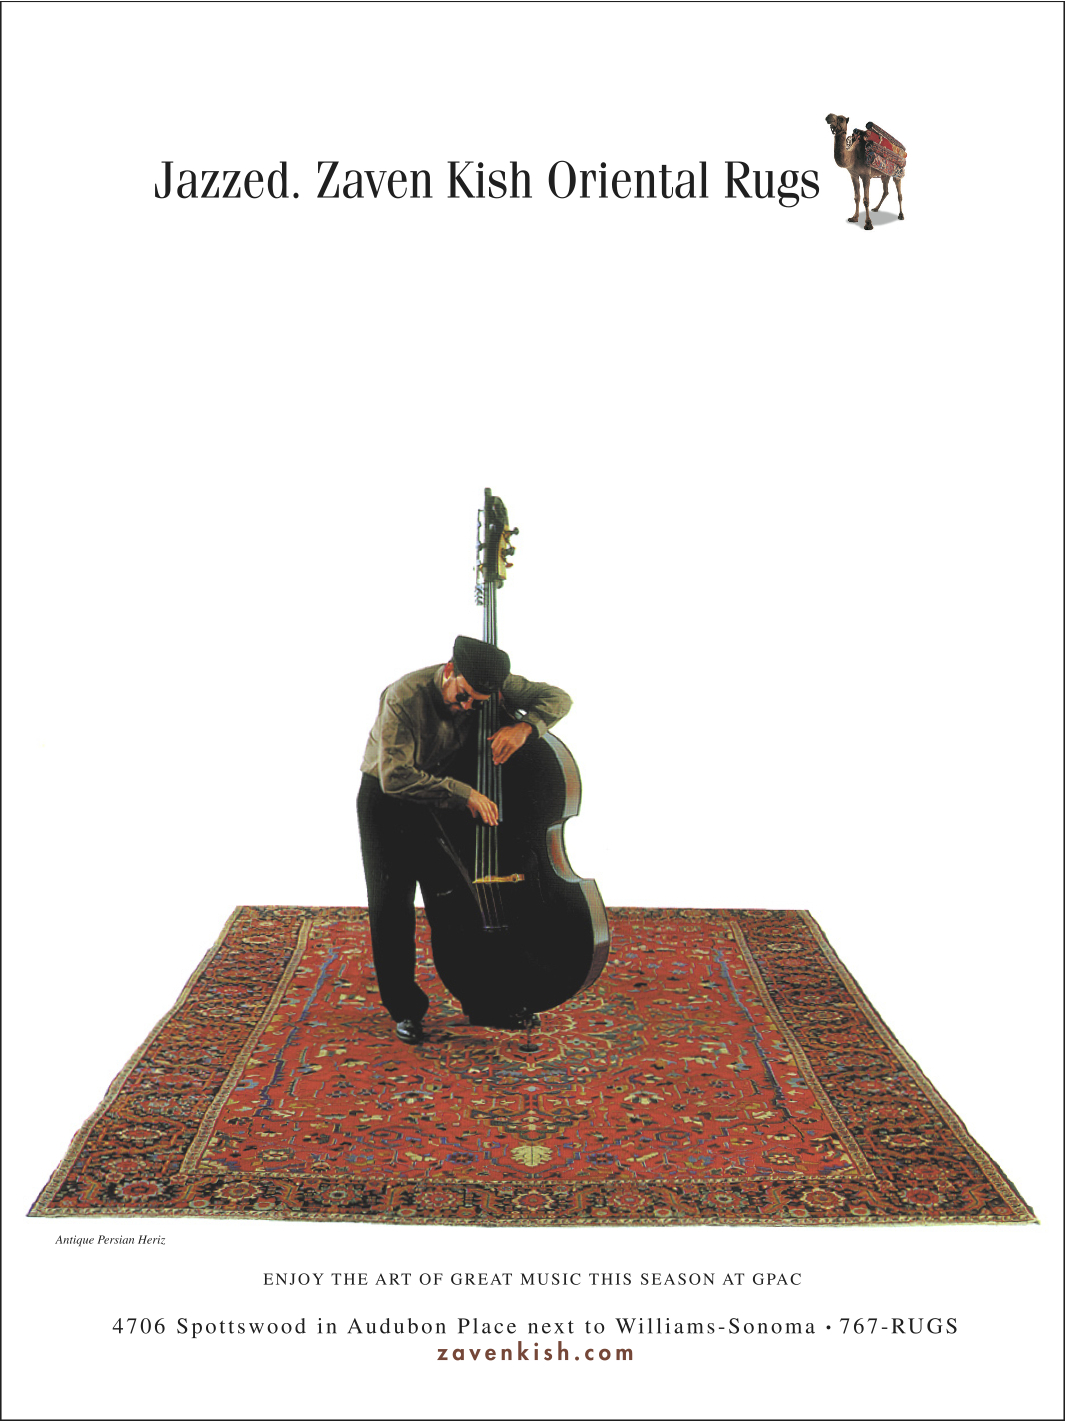  Zaven Kish Oriental Rugs full-page magazine ad 3  Branding creative, copywriting and design by Chuck Mitchell  Photograph by API Photographers, Memphis  © Chuck Mitchell  All rights reserved. 